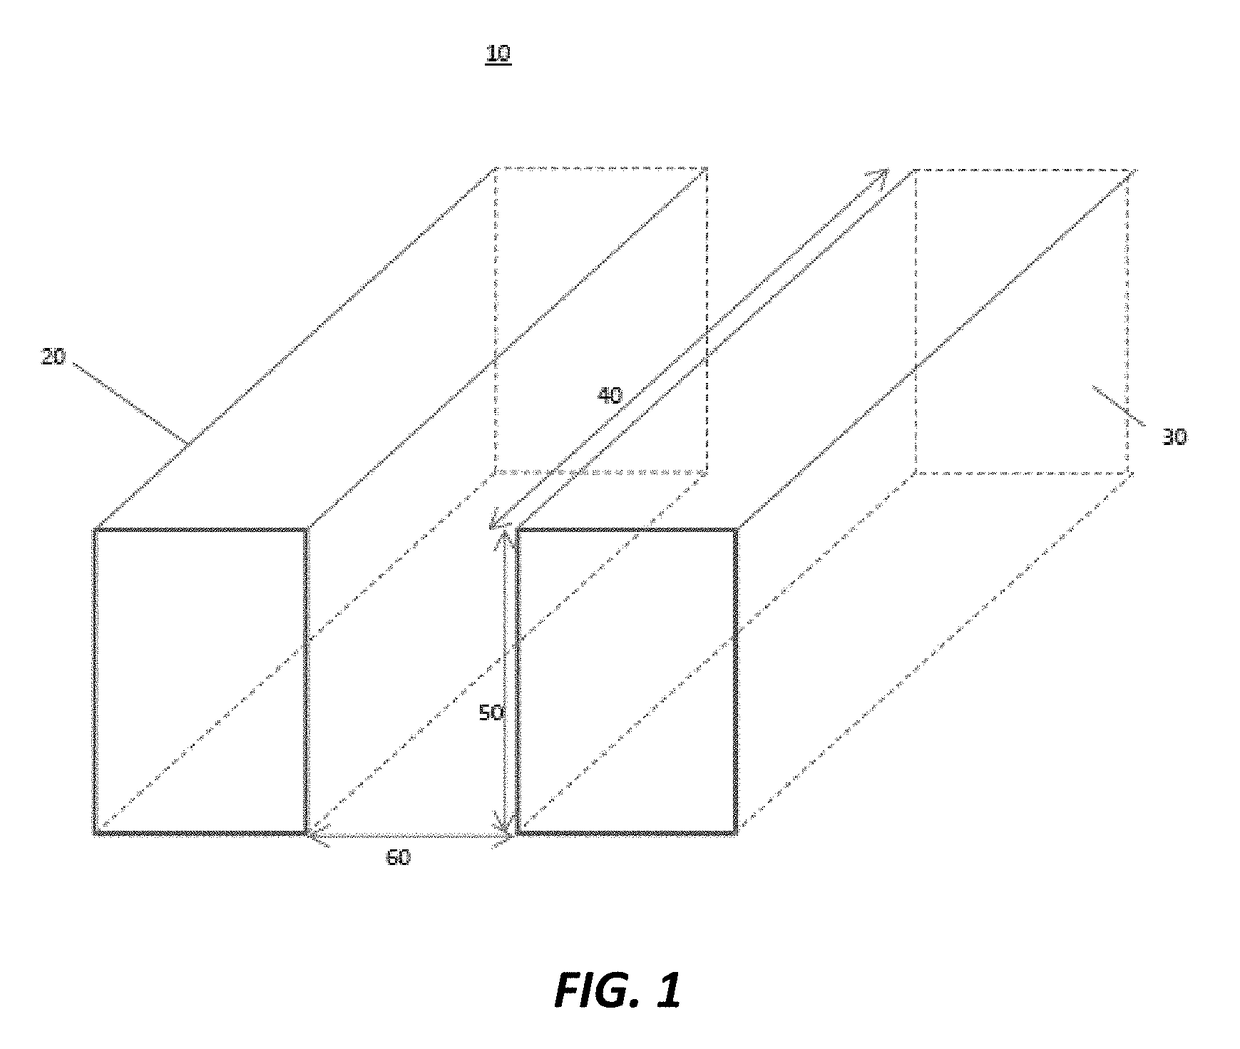 Selective film deposition method to form air gaps